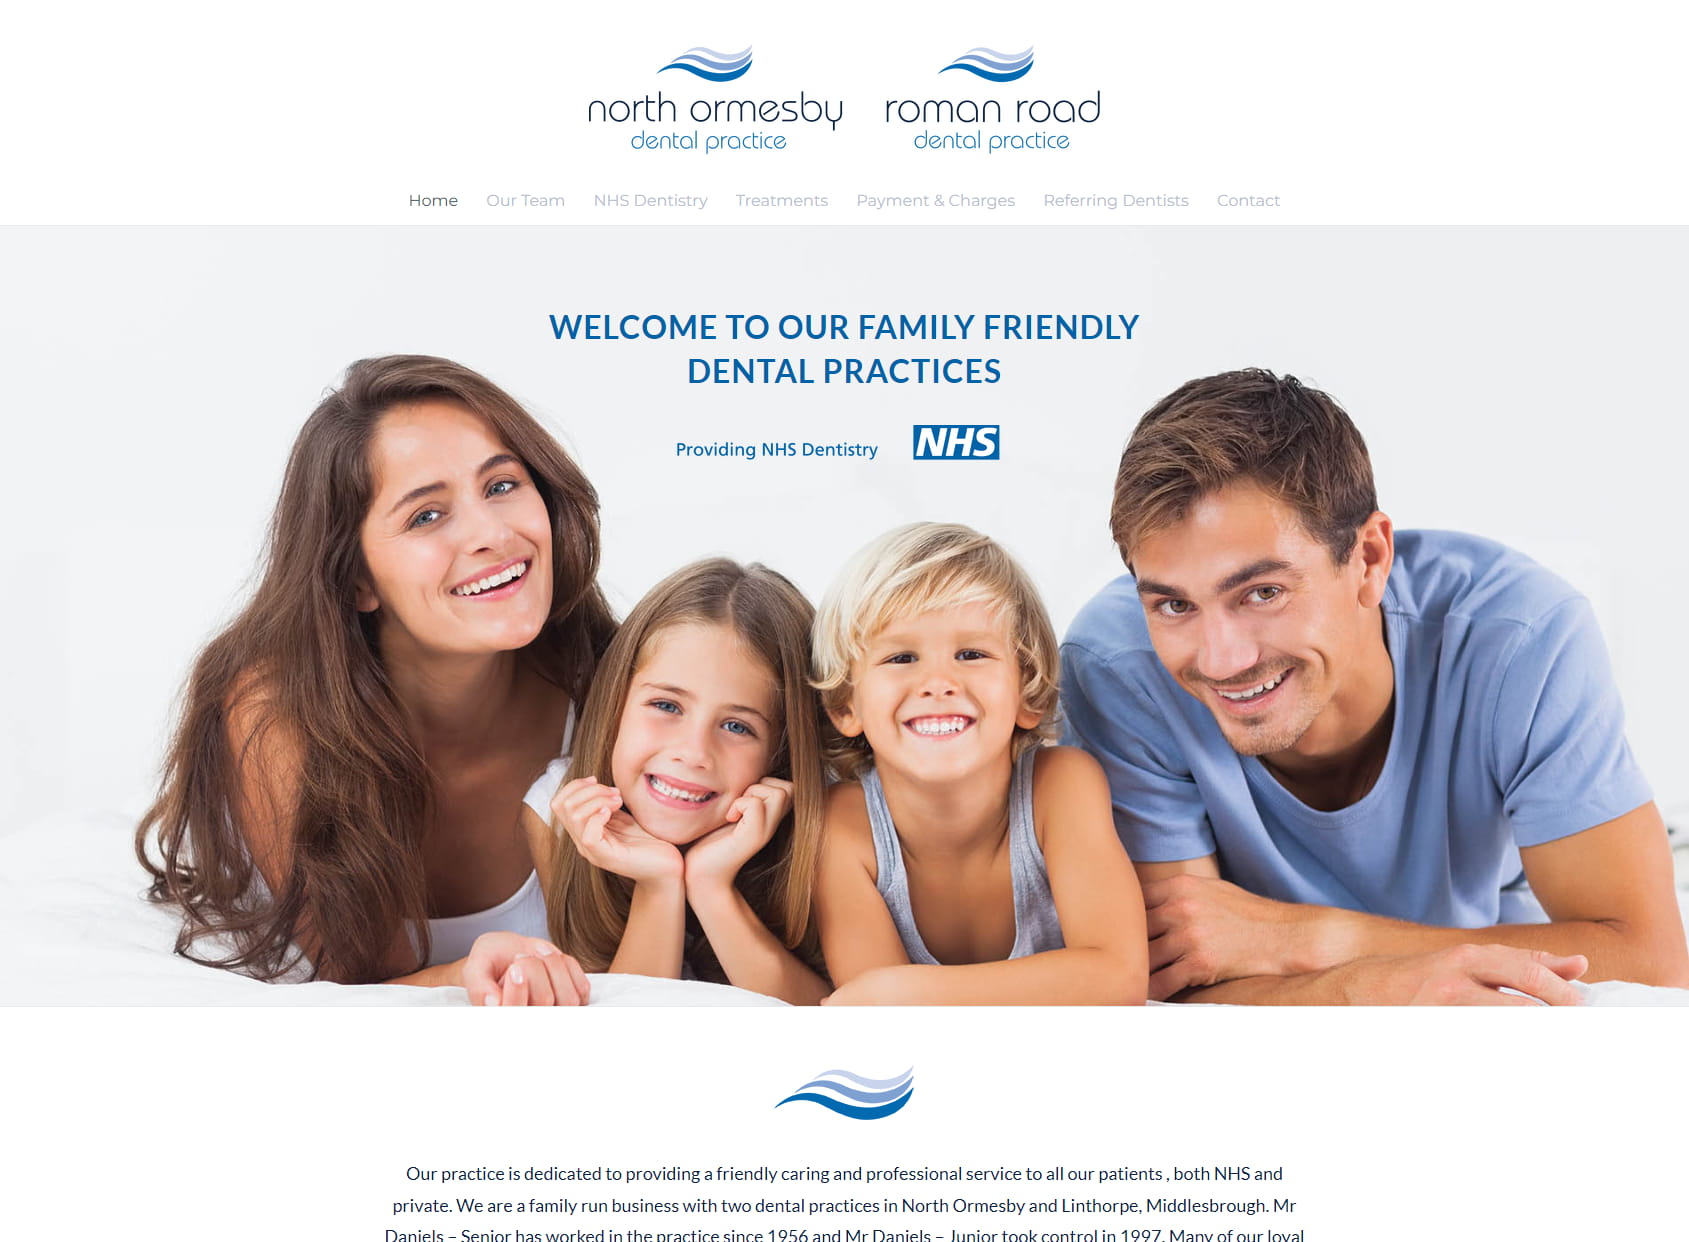 North Ormesby Dental Practice